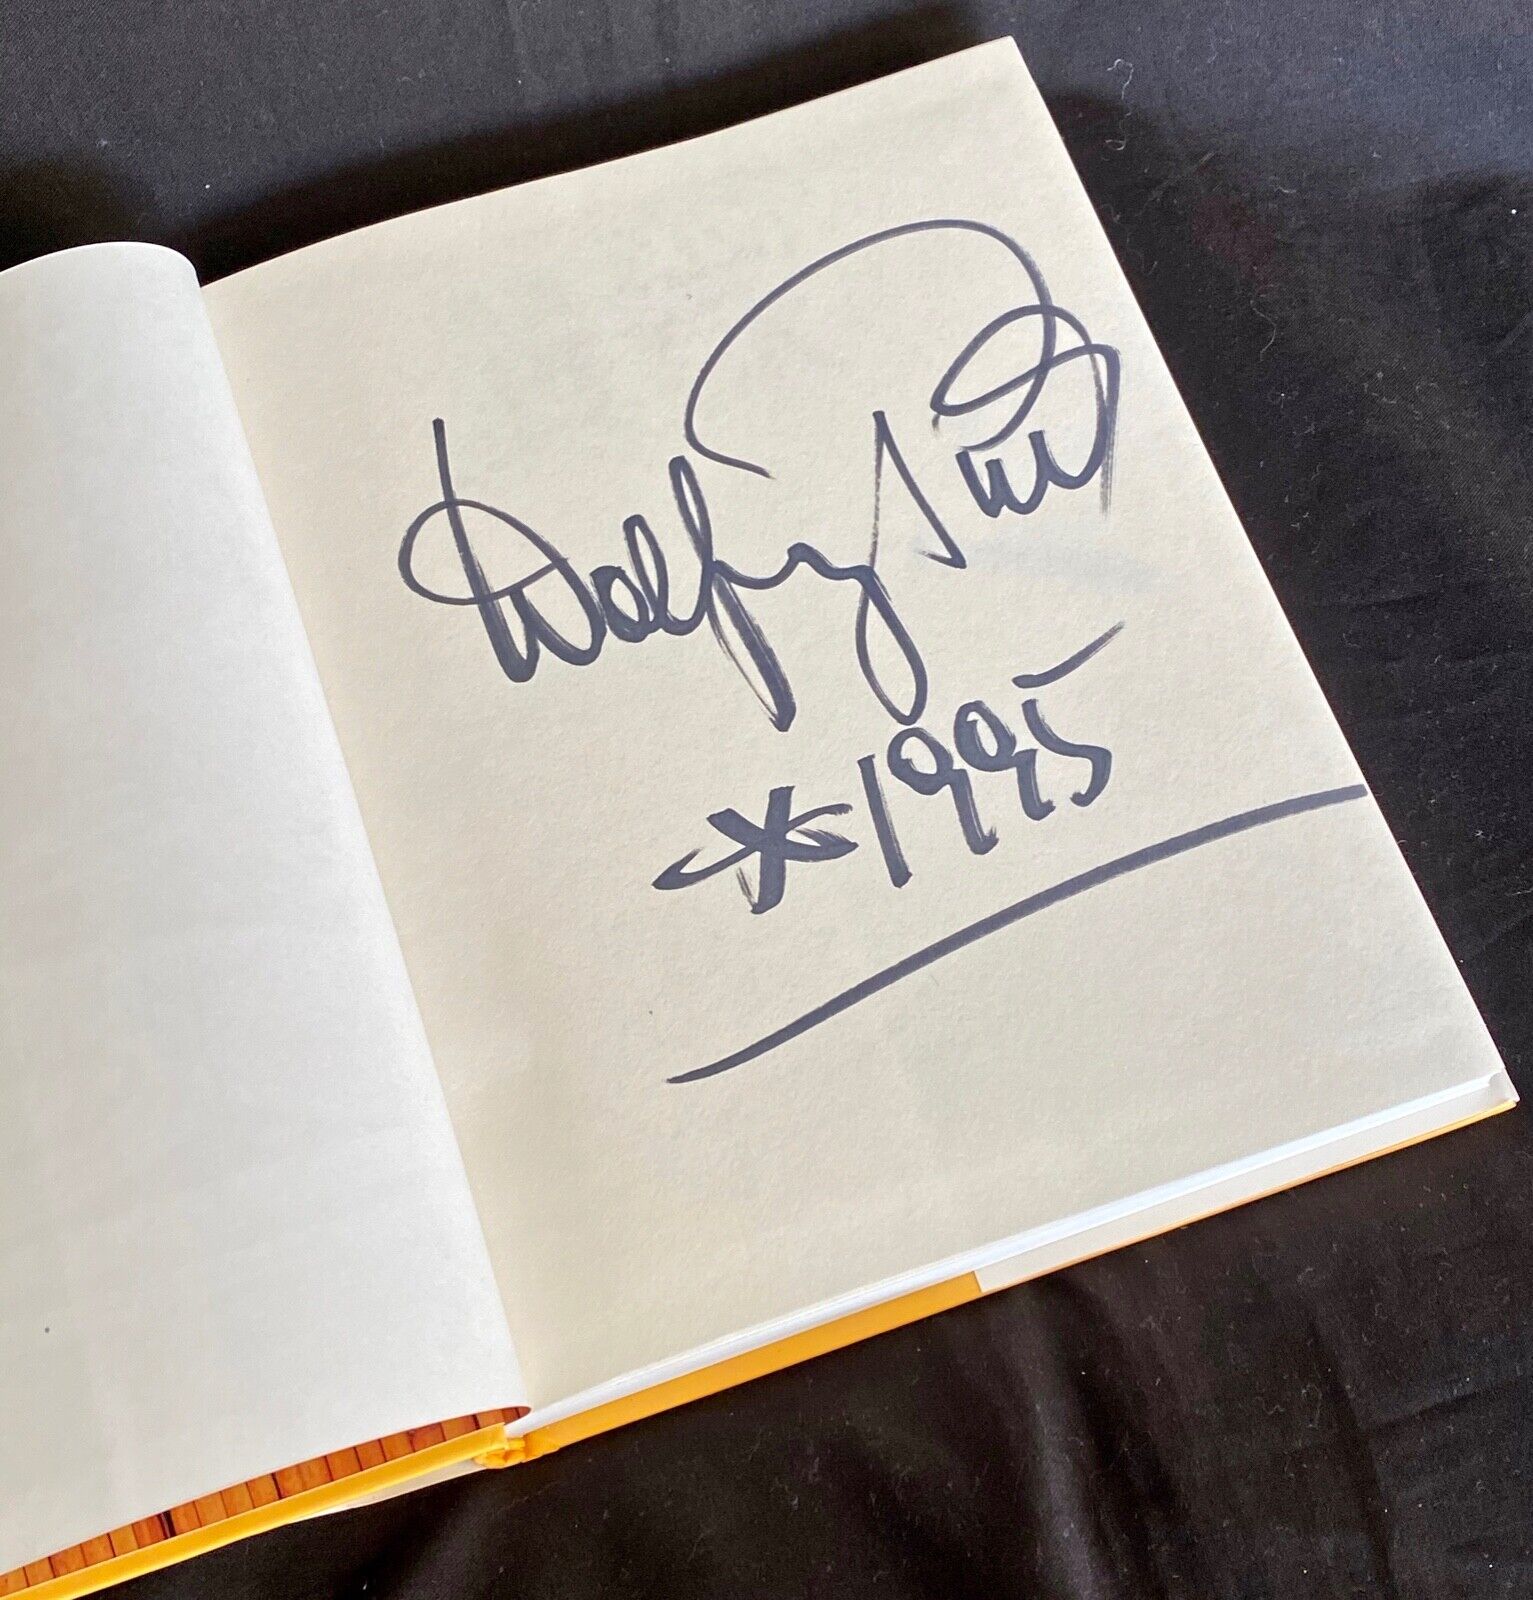 WOLFGANG PUCK SIGNED "SPAGO" APRON + "ADVENTURES IN THE KITCHEN" BOOK Без бренда - фотография #5